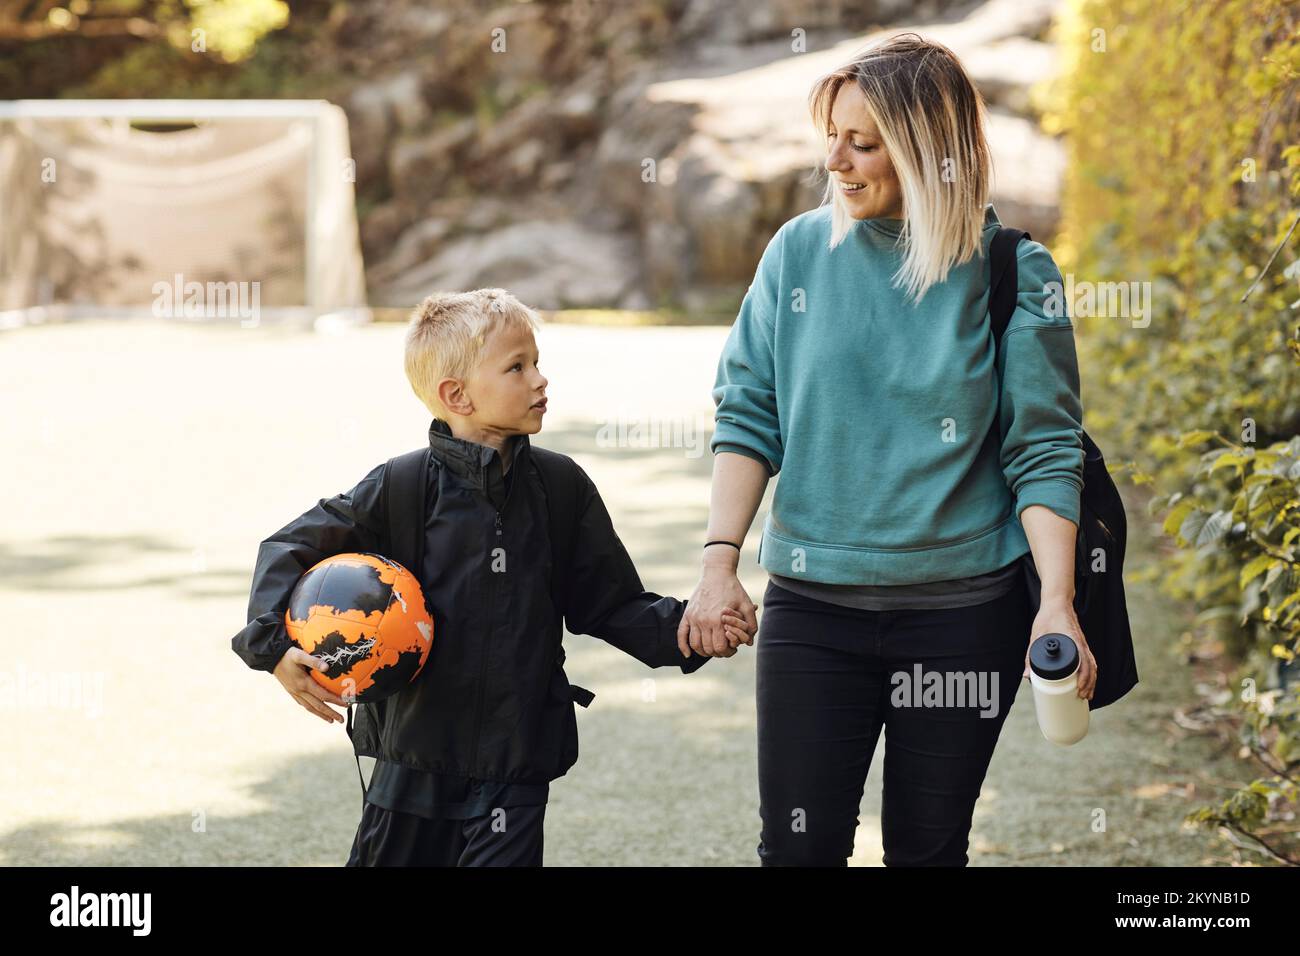 Mother holding hand of son carrying soccer ball while walking in ground Stock Photo